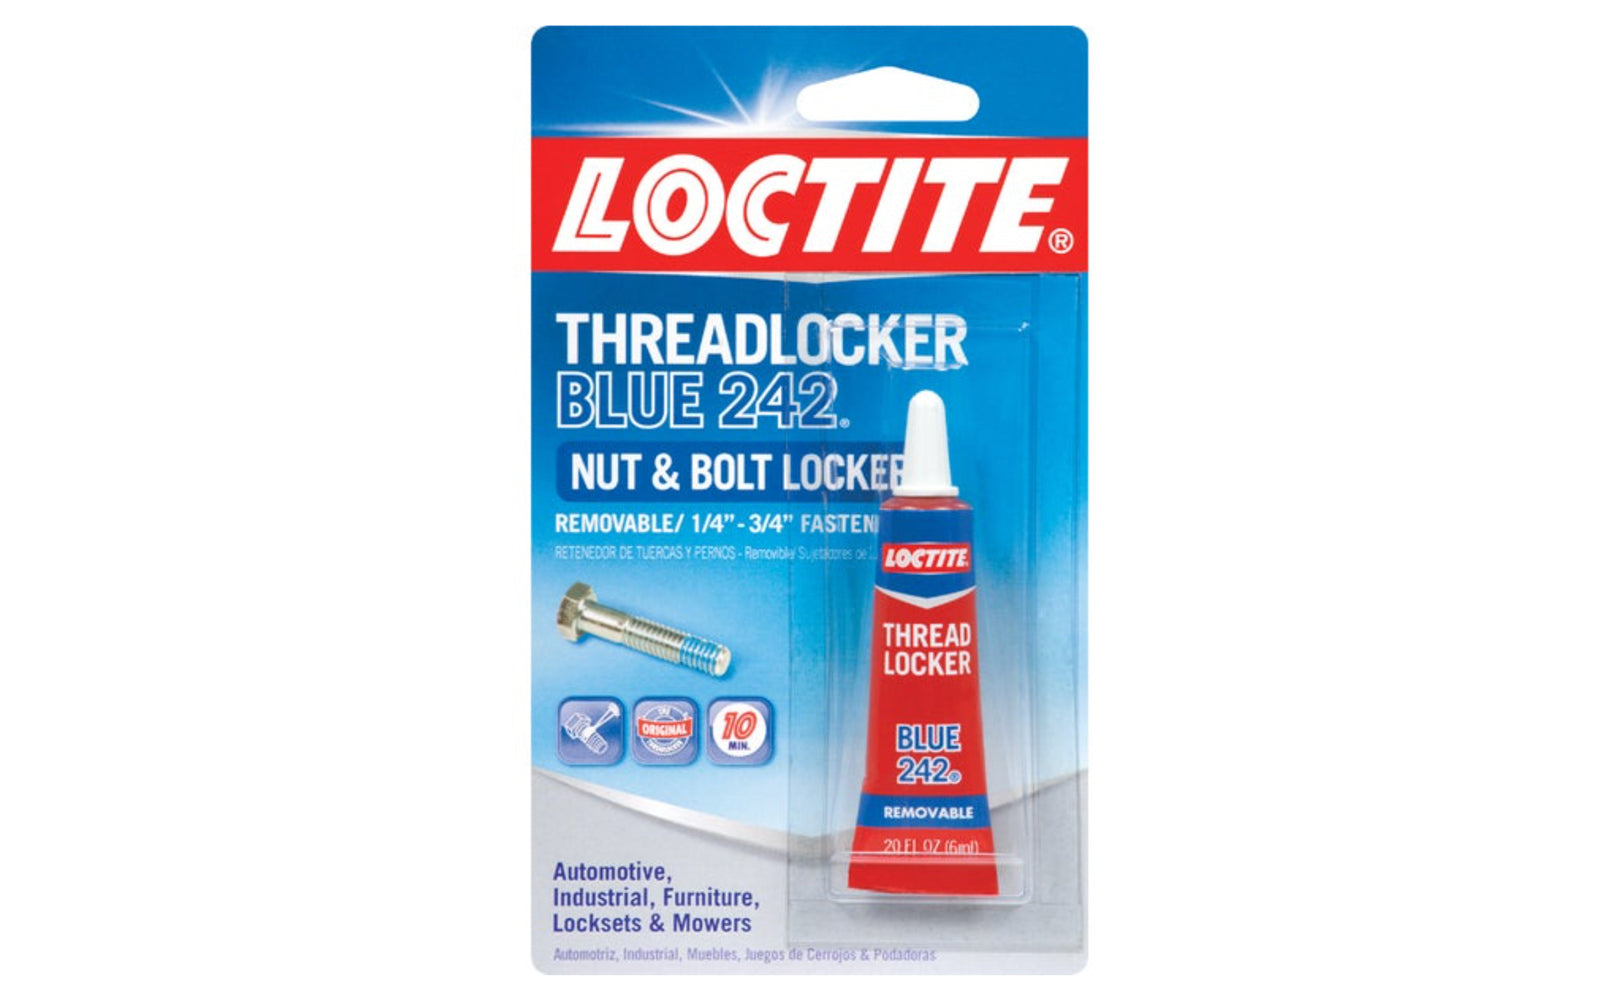 Loctite 0.2 oz Blue Threadlocker 242. This removable product fastens against loosening of nuts, screws, & bolts due to vibrations. It prevents against rusting & leaking. It's also OEM certified. 079340242005